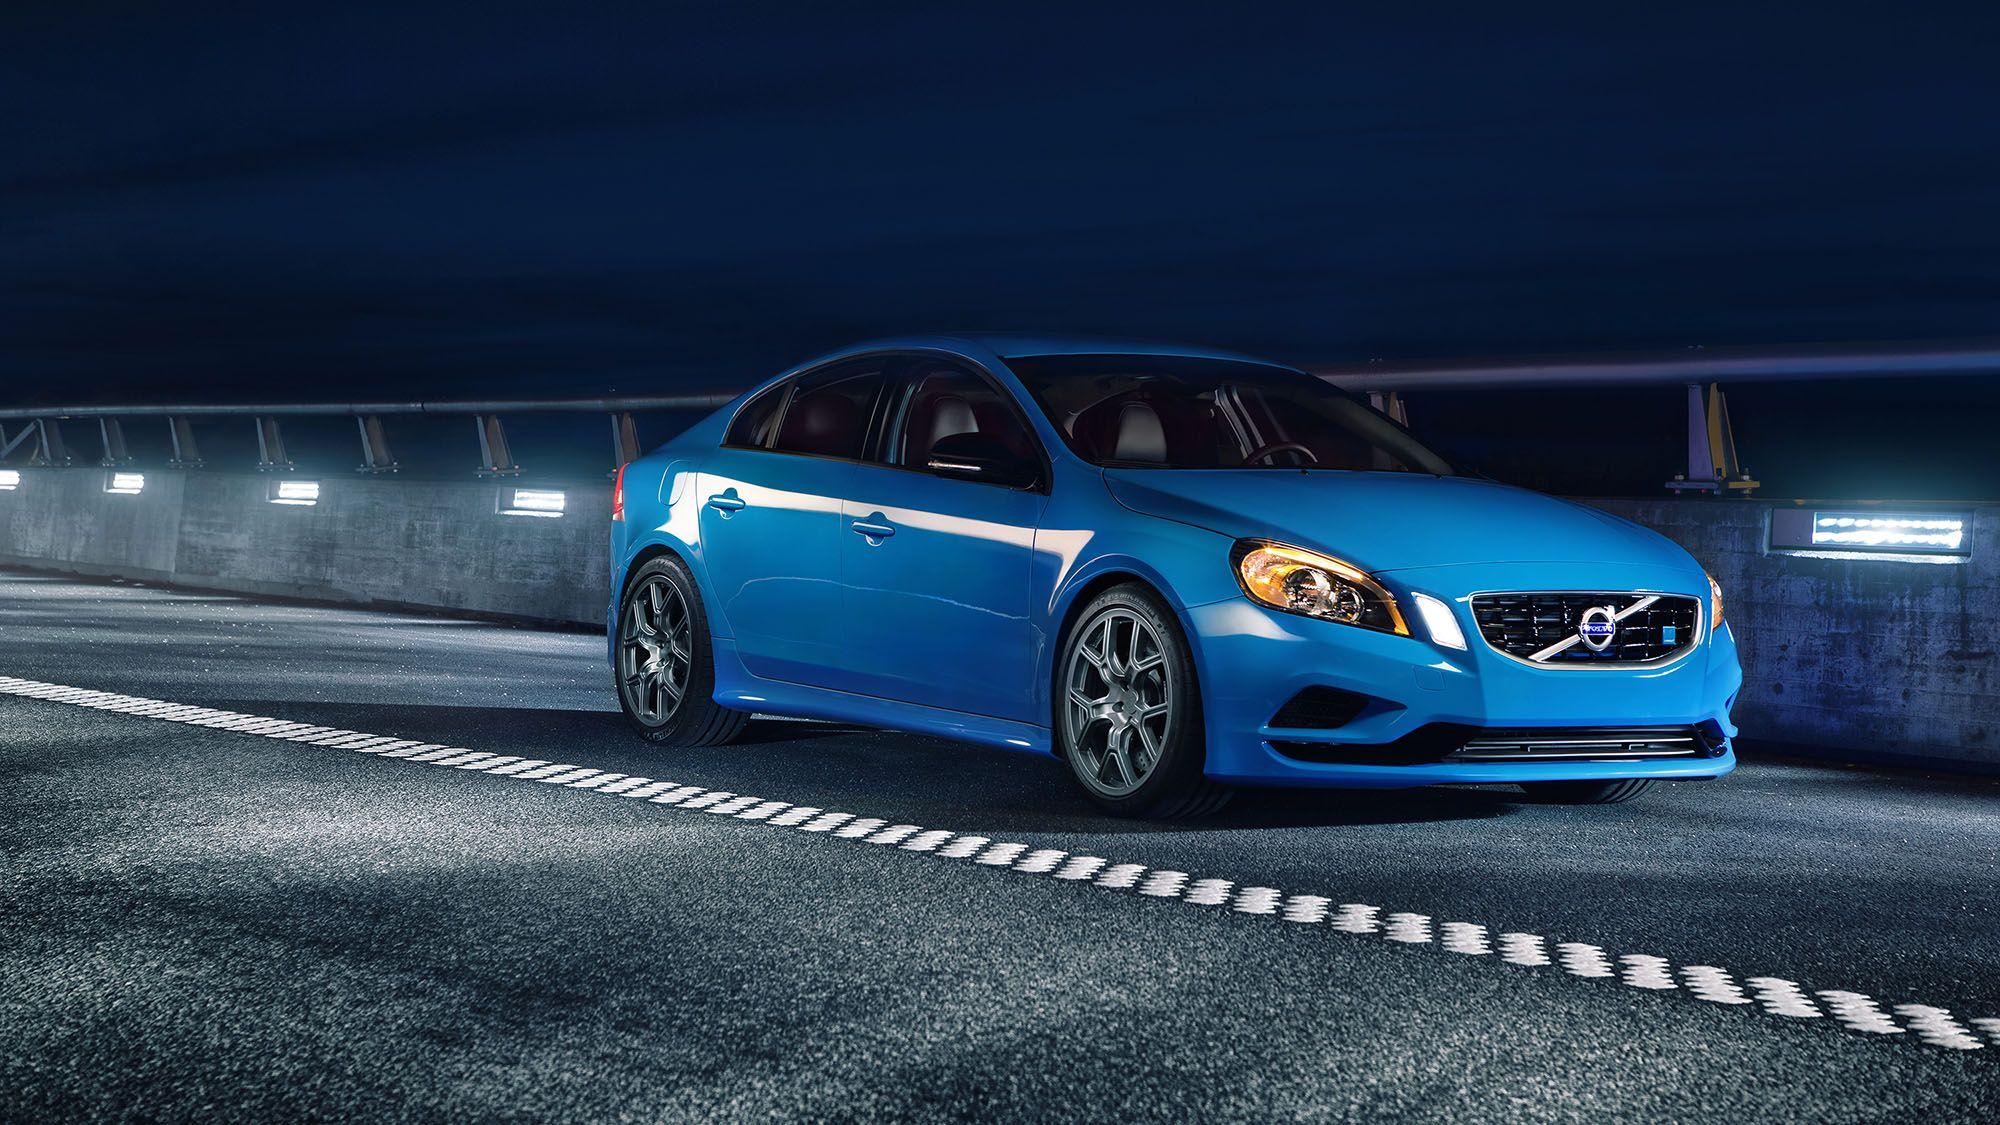 Volvo Looks For Luxury Sports Car Sector With All New Polestar Models